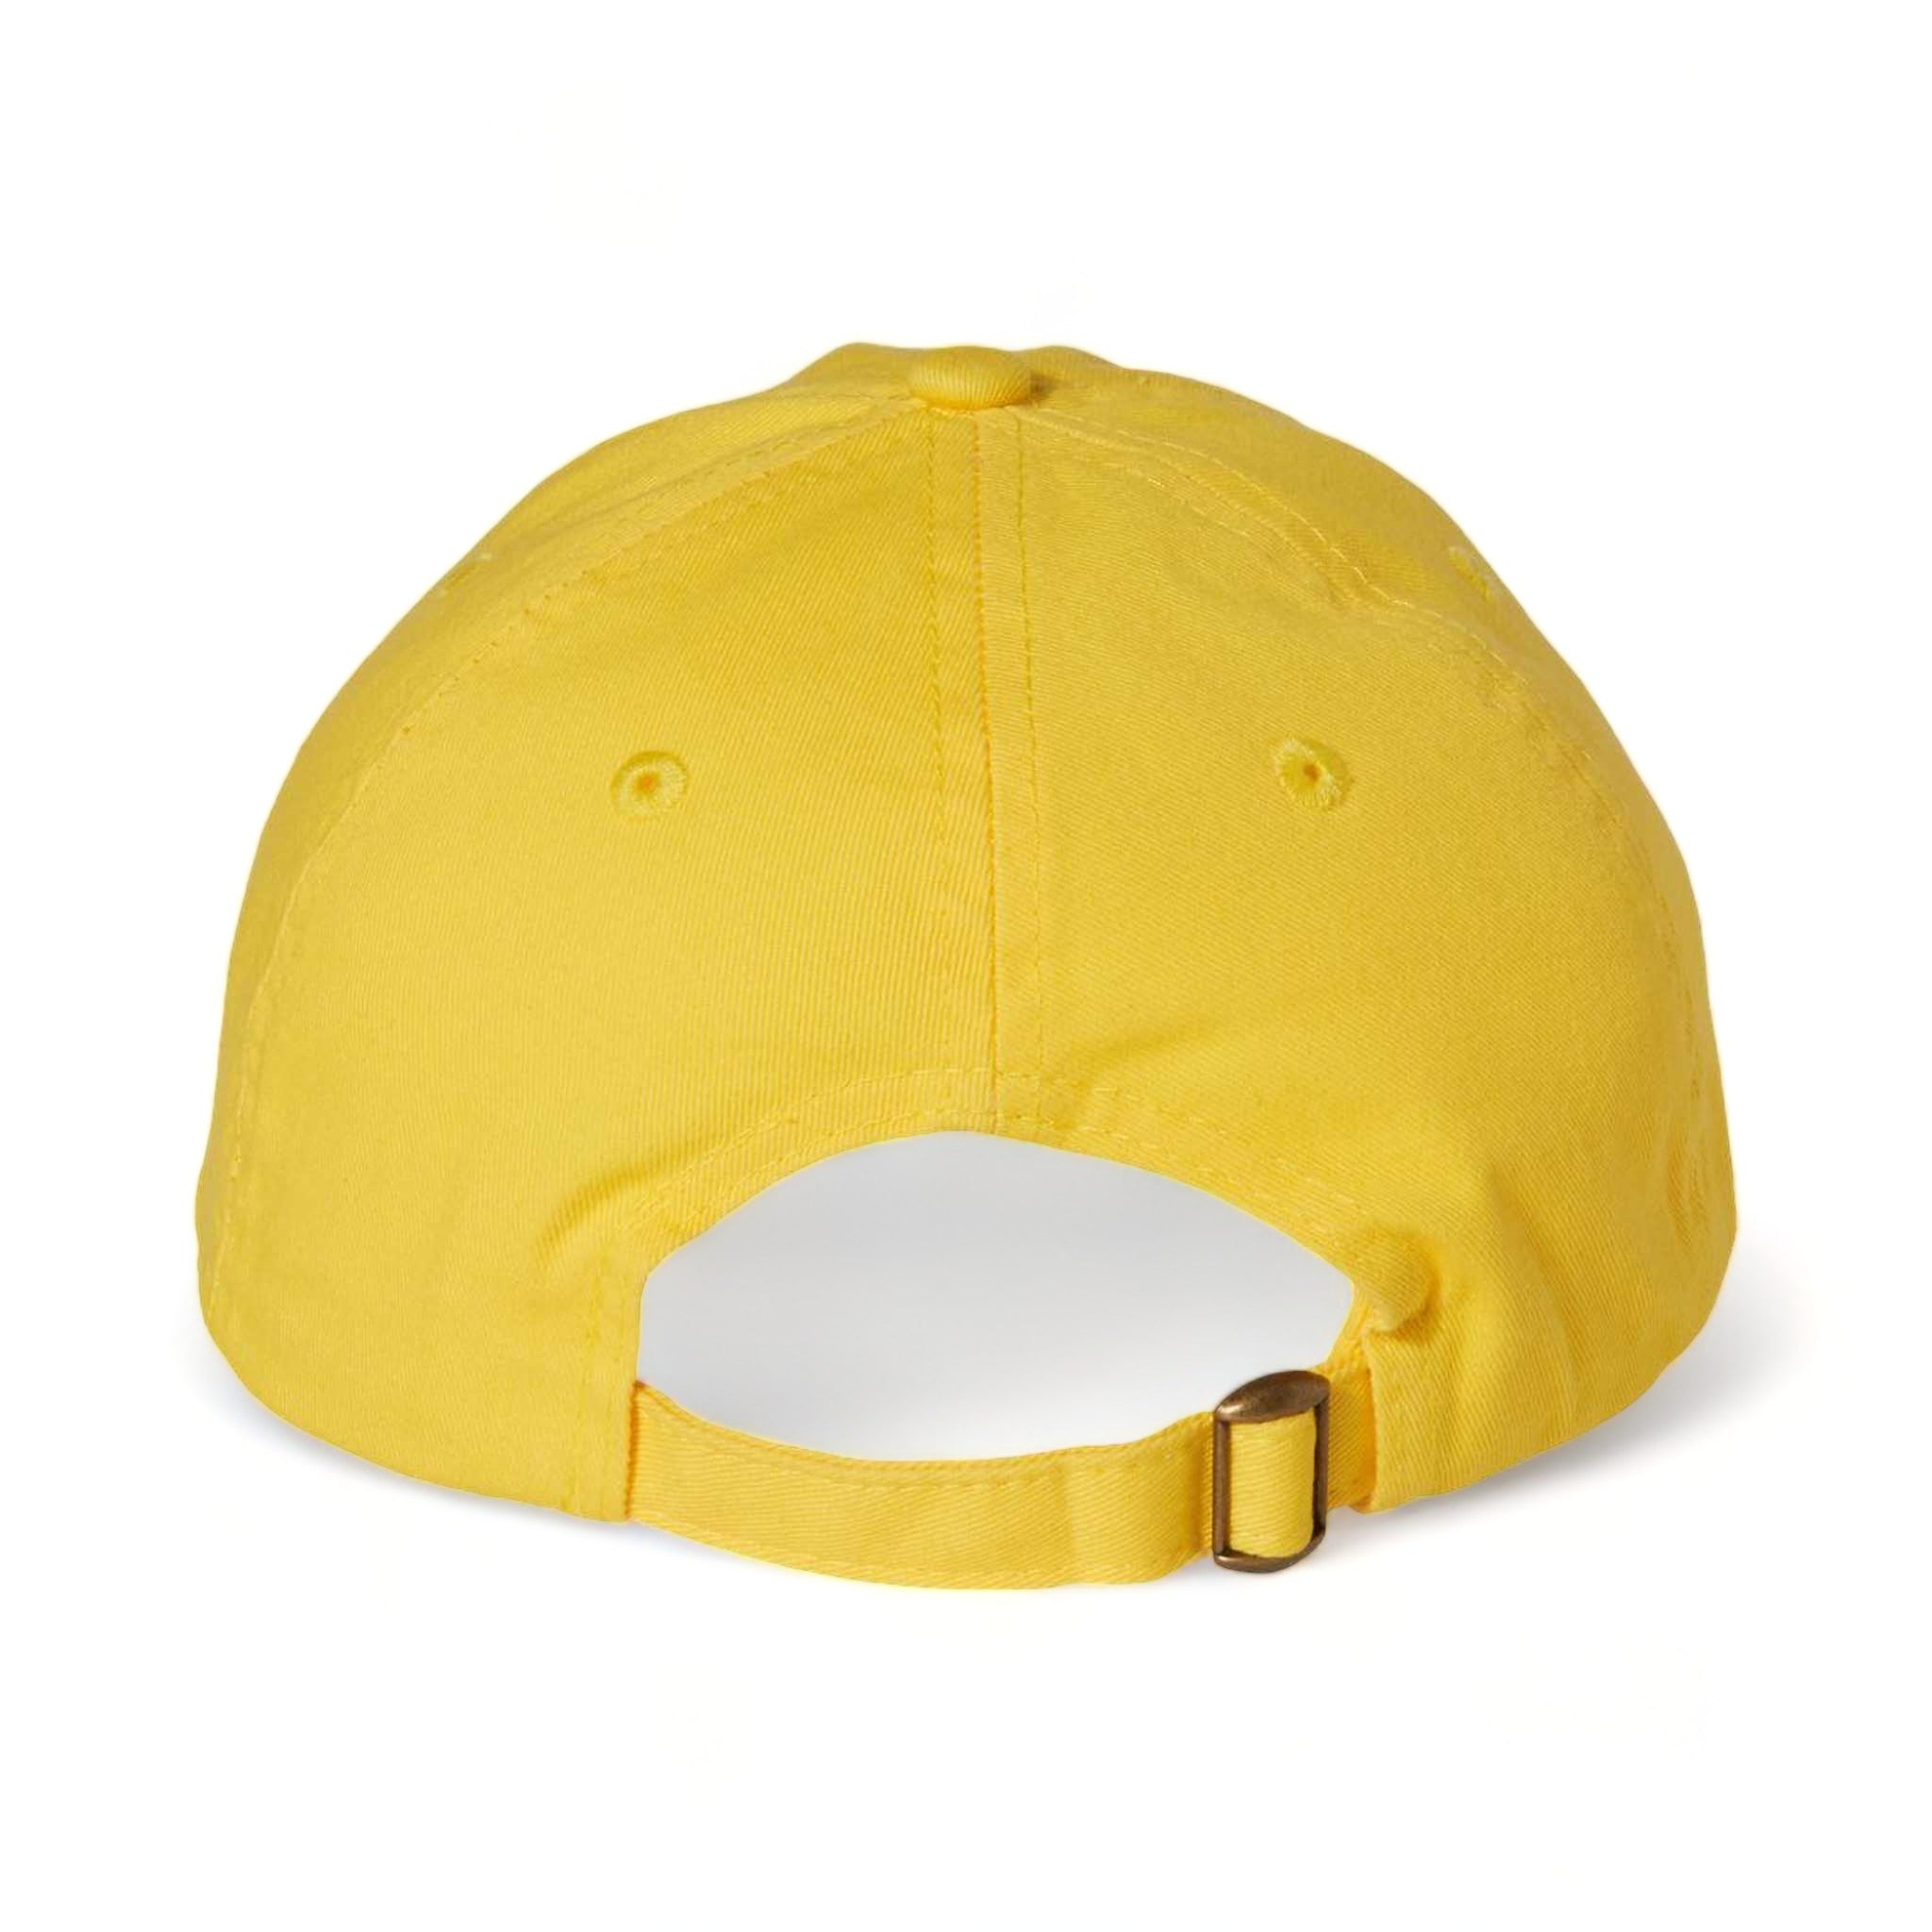 Back view of Valucap VC300A custom hat in yellow